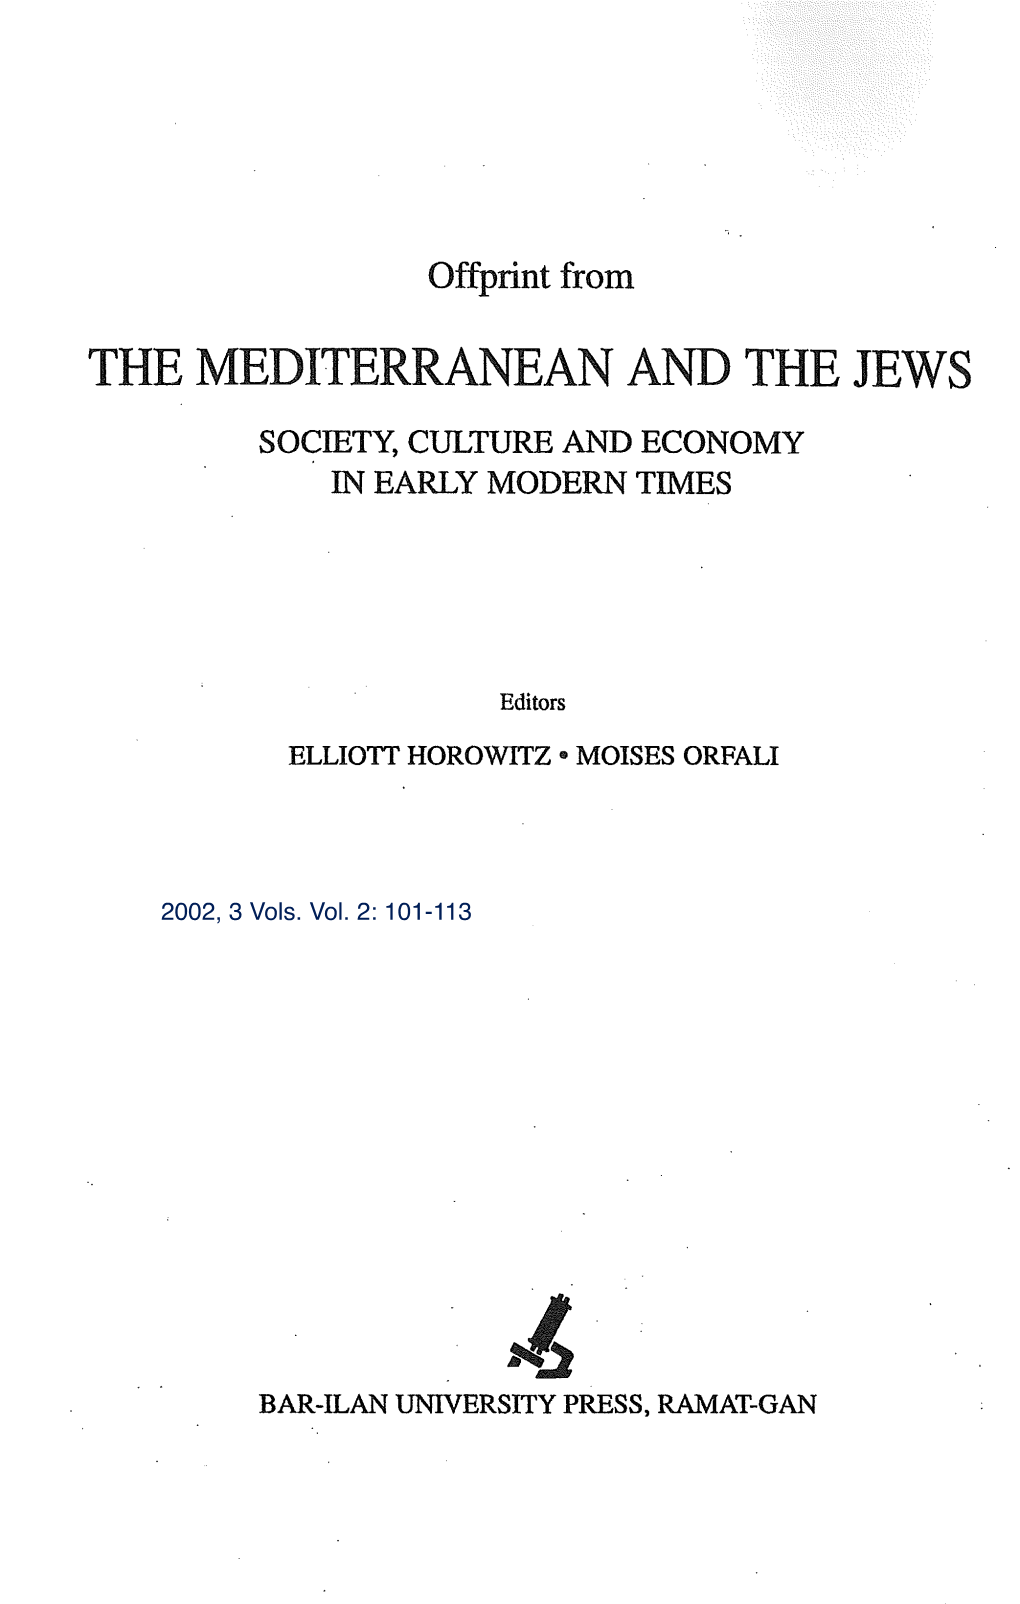 The Mediterranean and the Jews Society, Culture and Economy in Early Modern Times